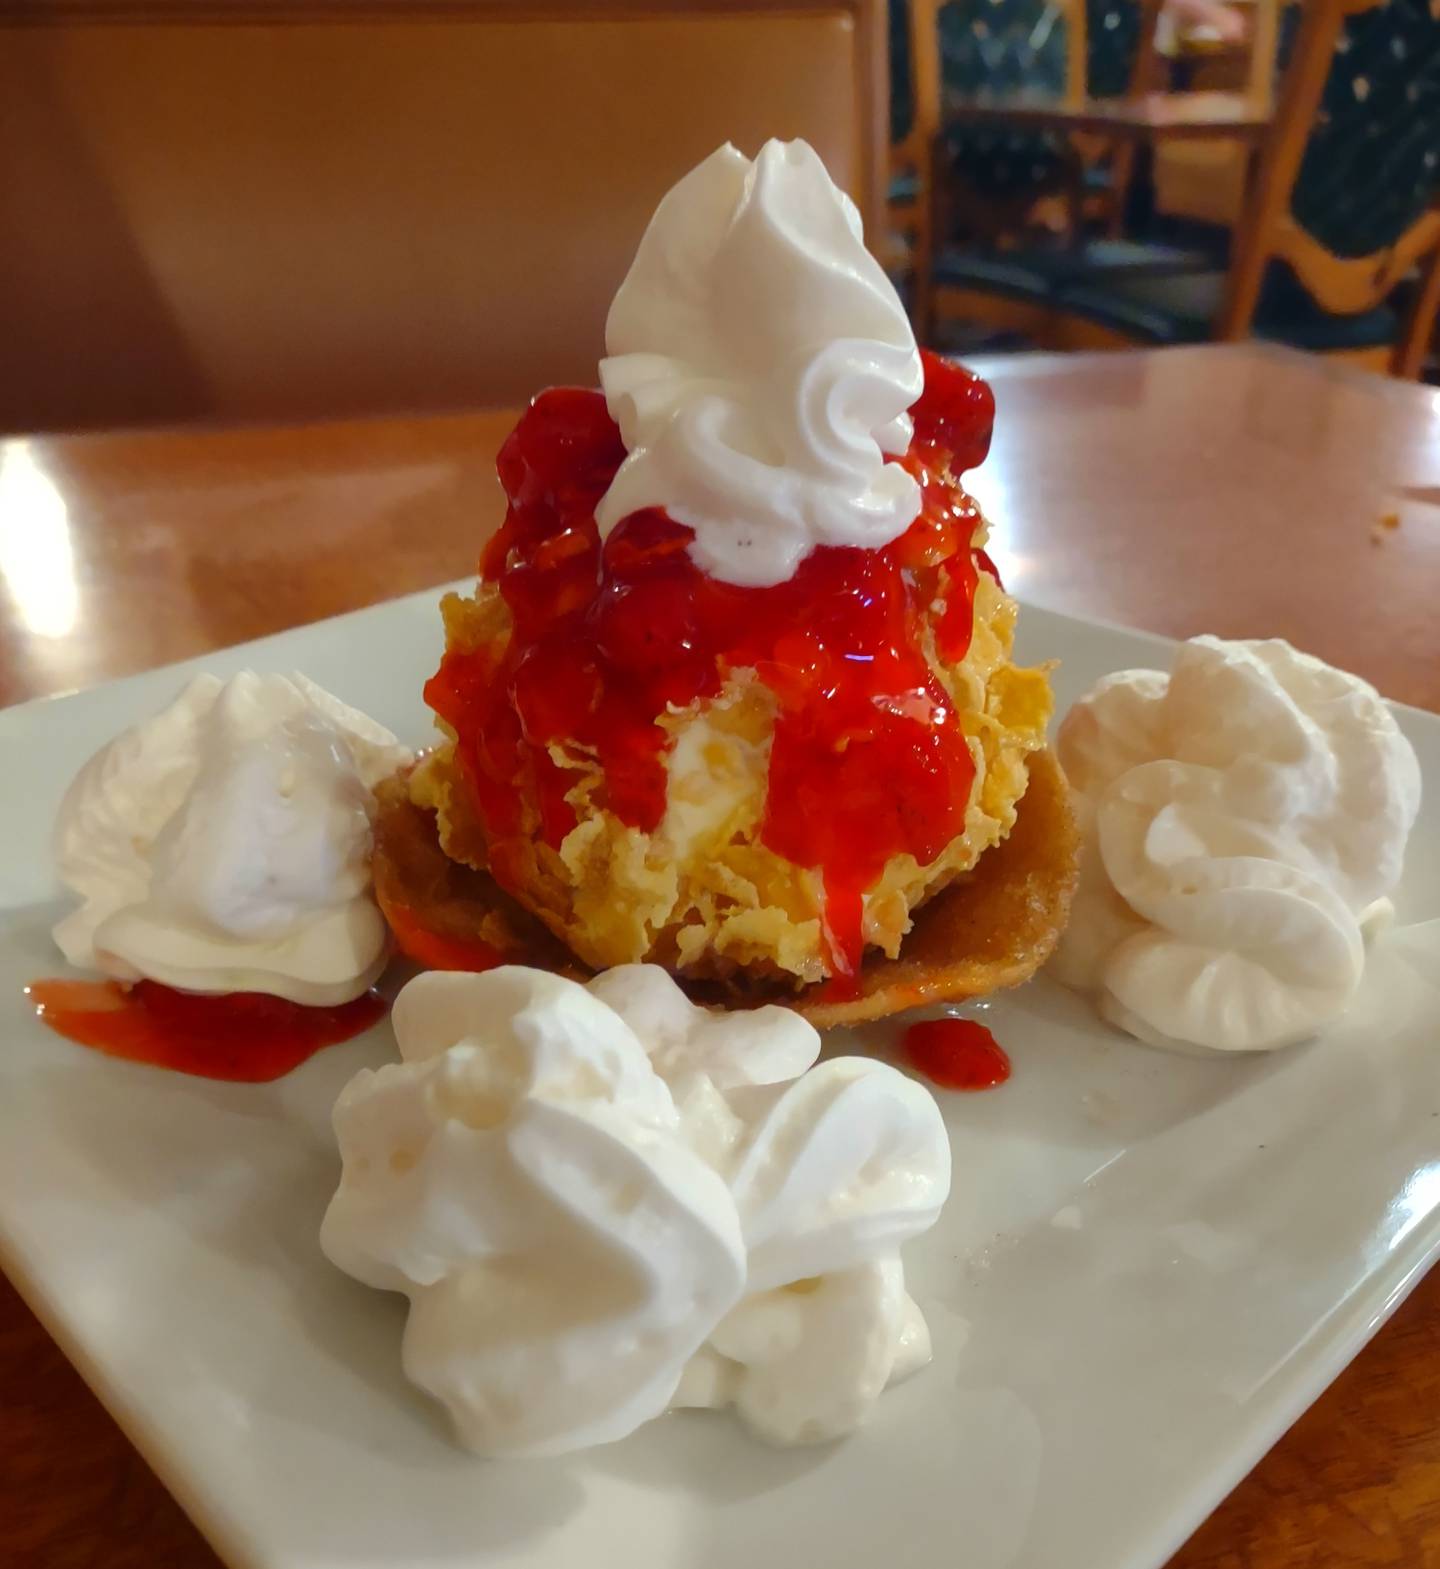 The fried ice cream at Mr. Salsas topped with strawberry sauce.